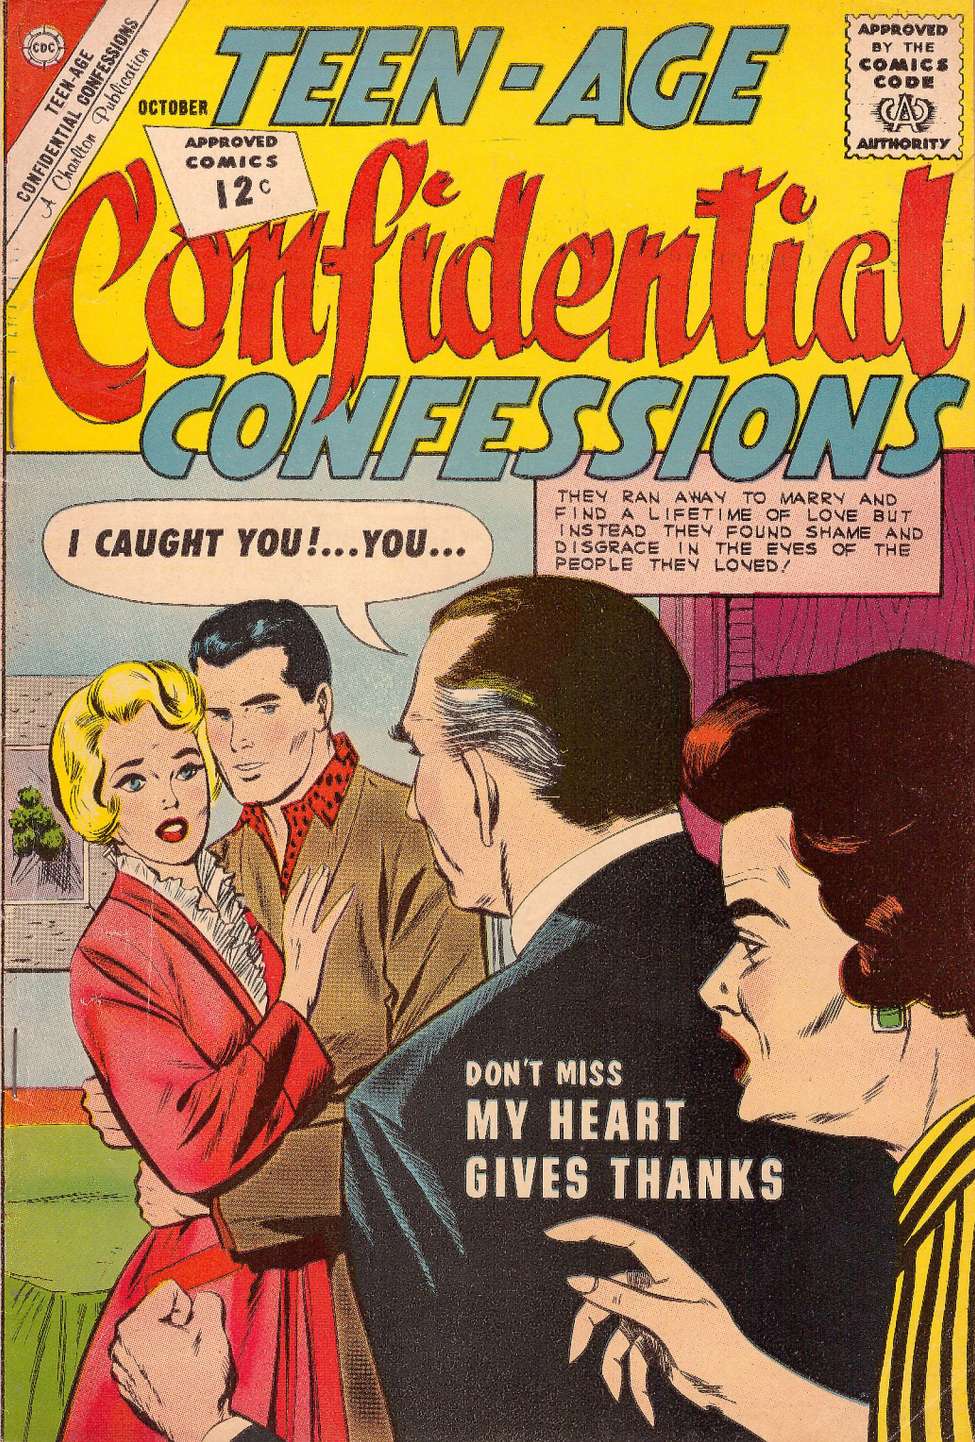 Comic Book Cover For Teen-Age Confidential Confessions 14